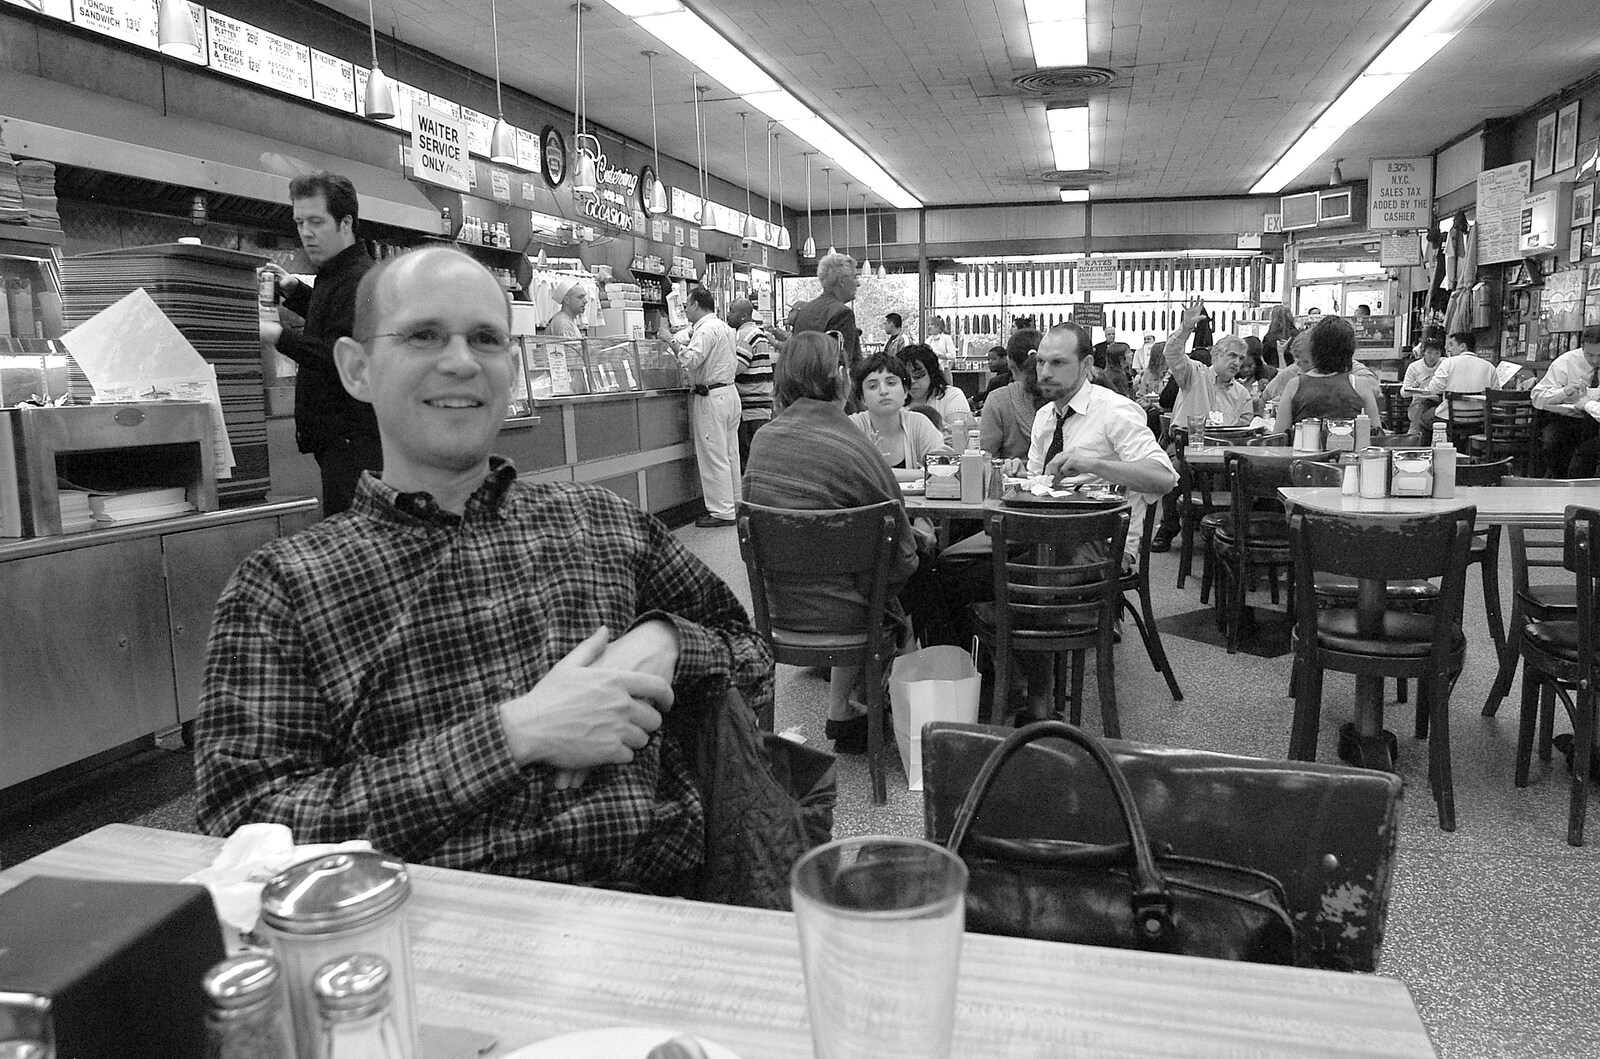 Phil in Katz's Deli from A Union Square Demo, Bryant Park and Columbus Circle, New York, US - 2nd May 2006